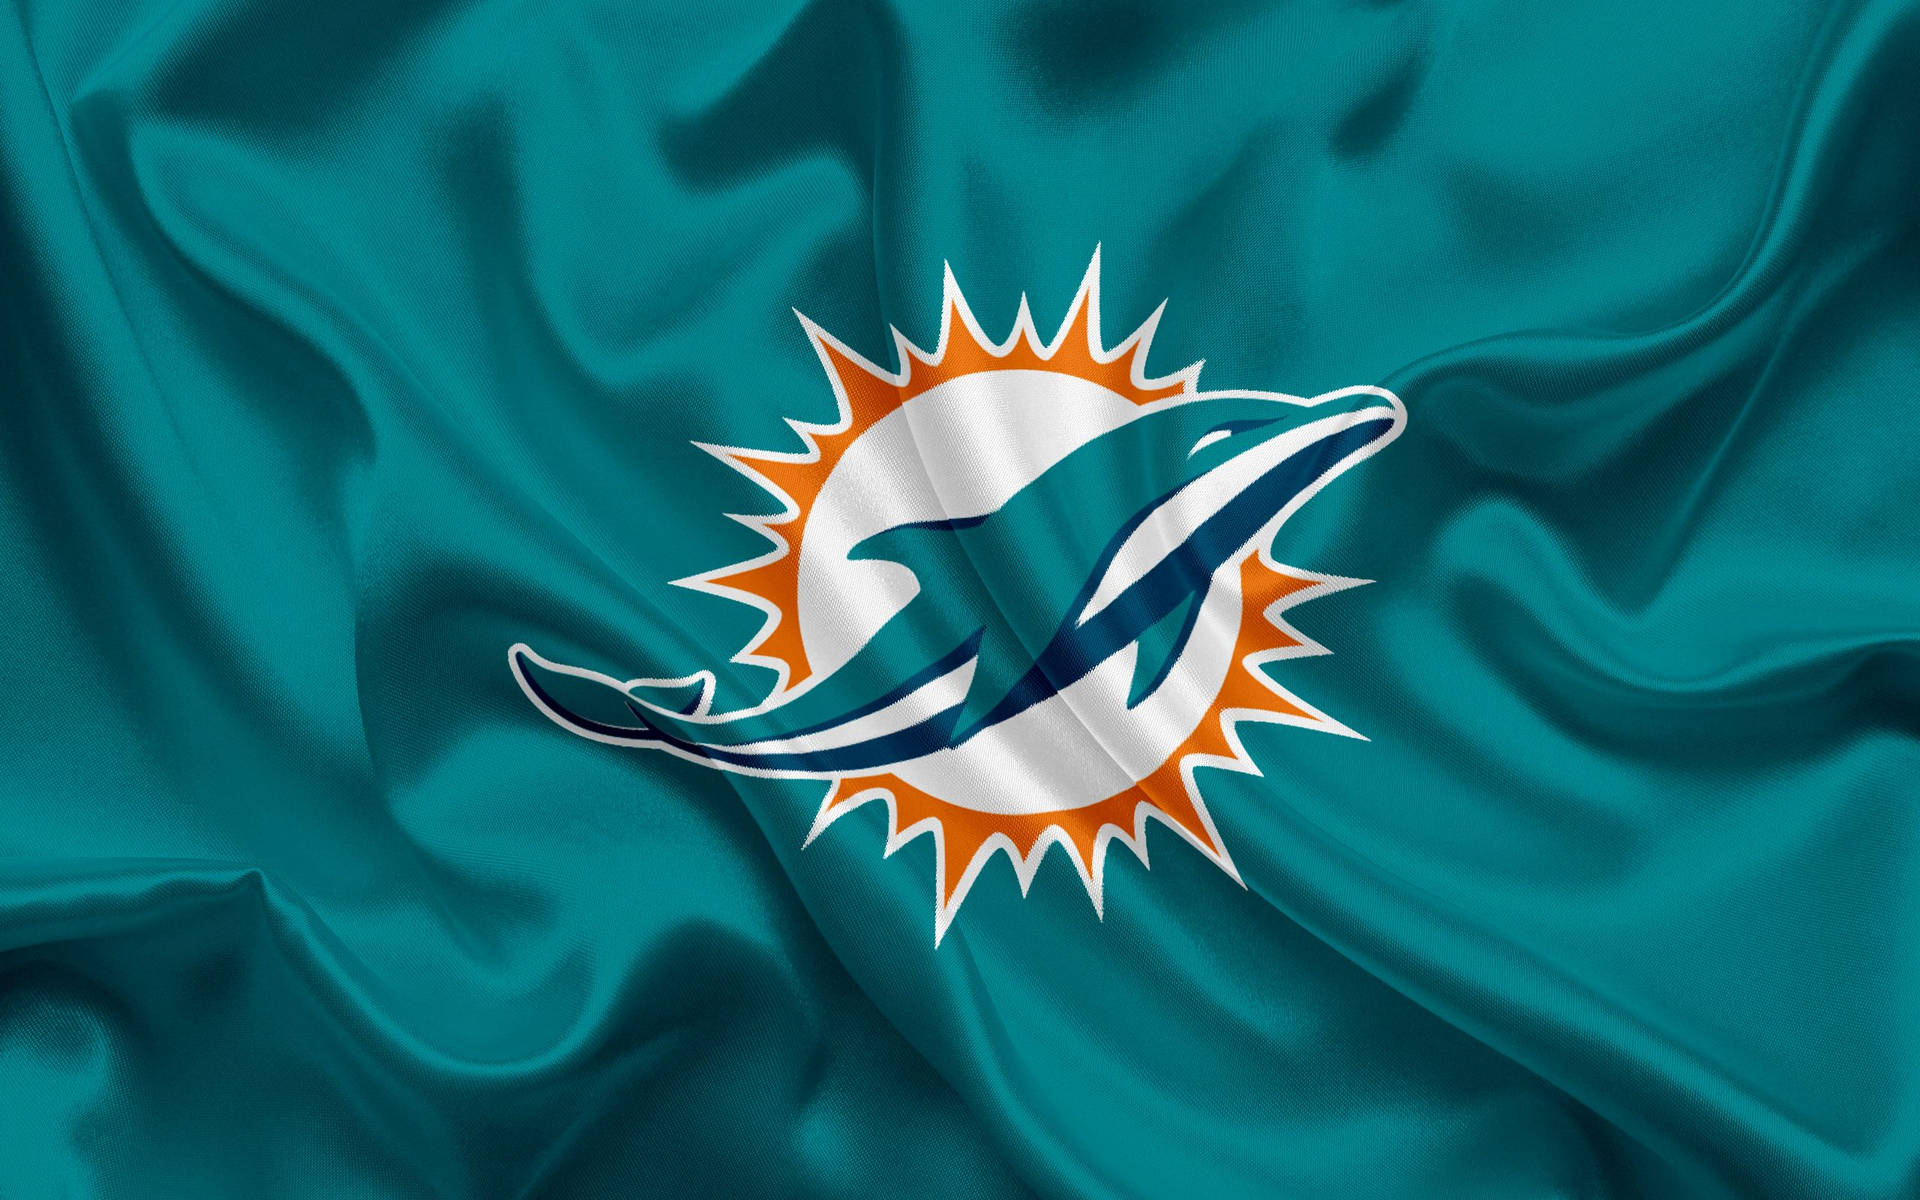 Top 999+ Miami Dolphins Wallpapers Full HD, 4K✅Free to Use